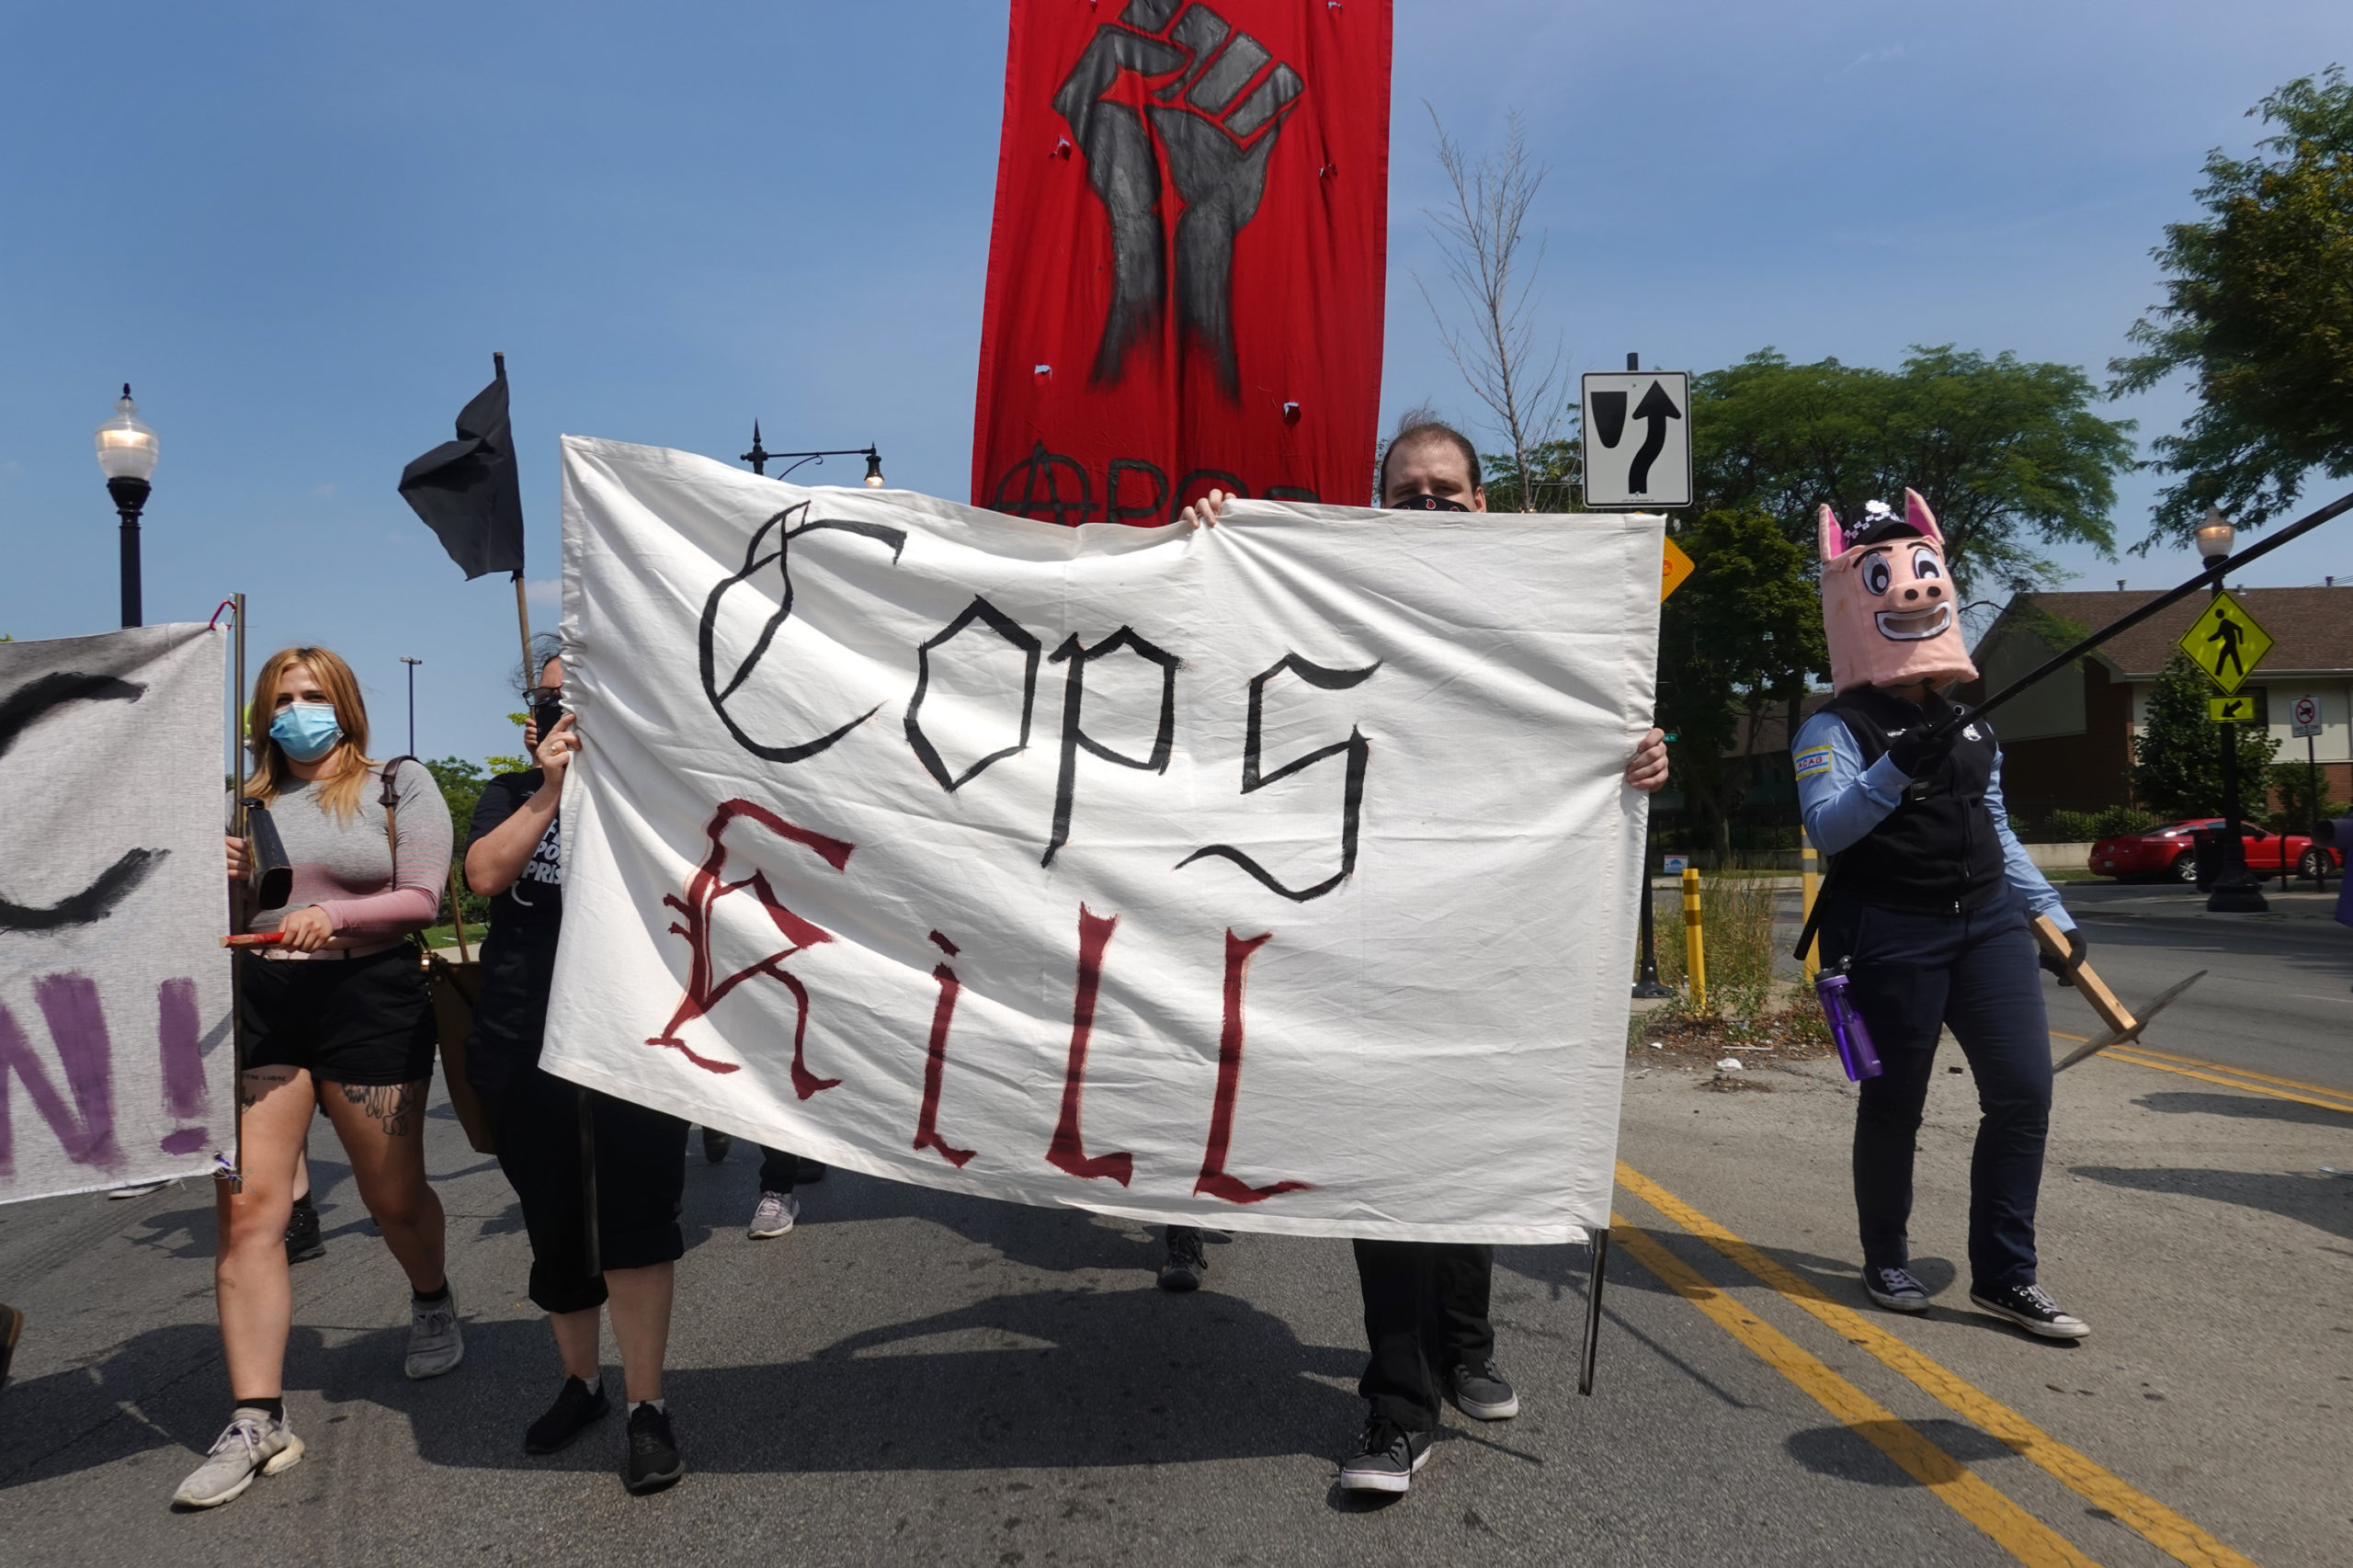 CHICAGO, ILLINOIS - AUGUST 15: Demonstrators protest against police on the city's westside on August 15, 2020 in Chicago, Illinois. The demonstration was one of several in the city today, either in support of or in opposition to police. (Photo by Scott Olson/Getty Images)